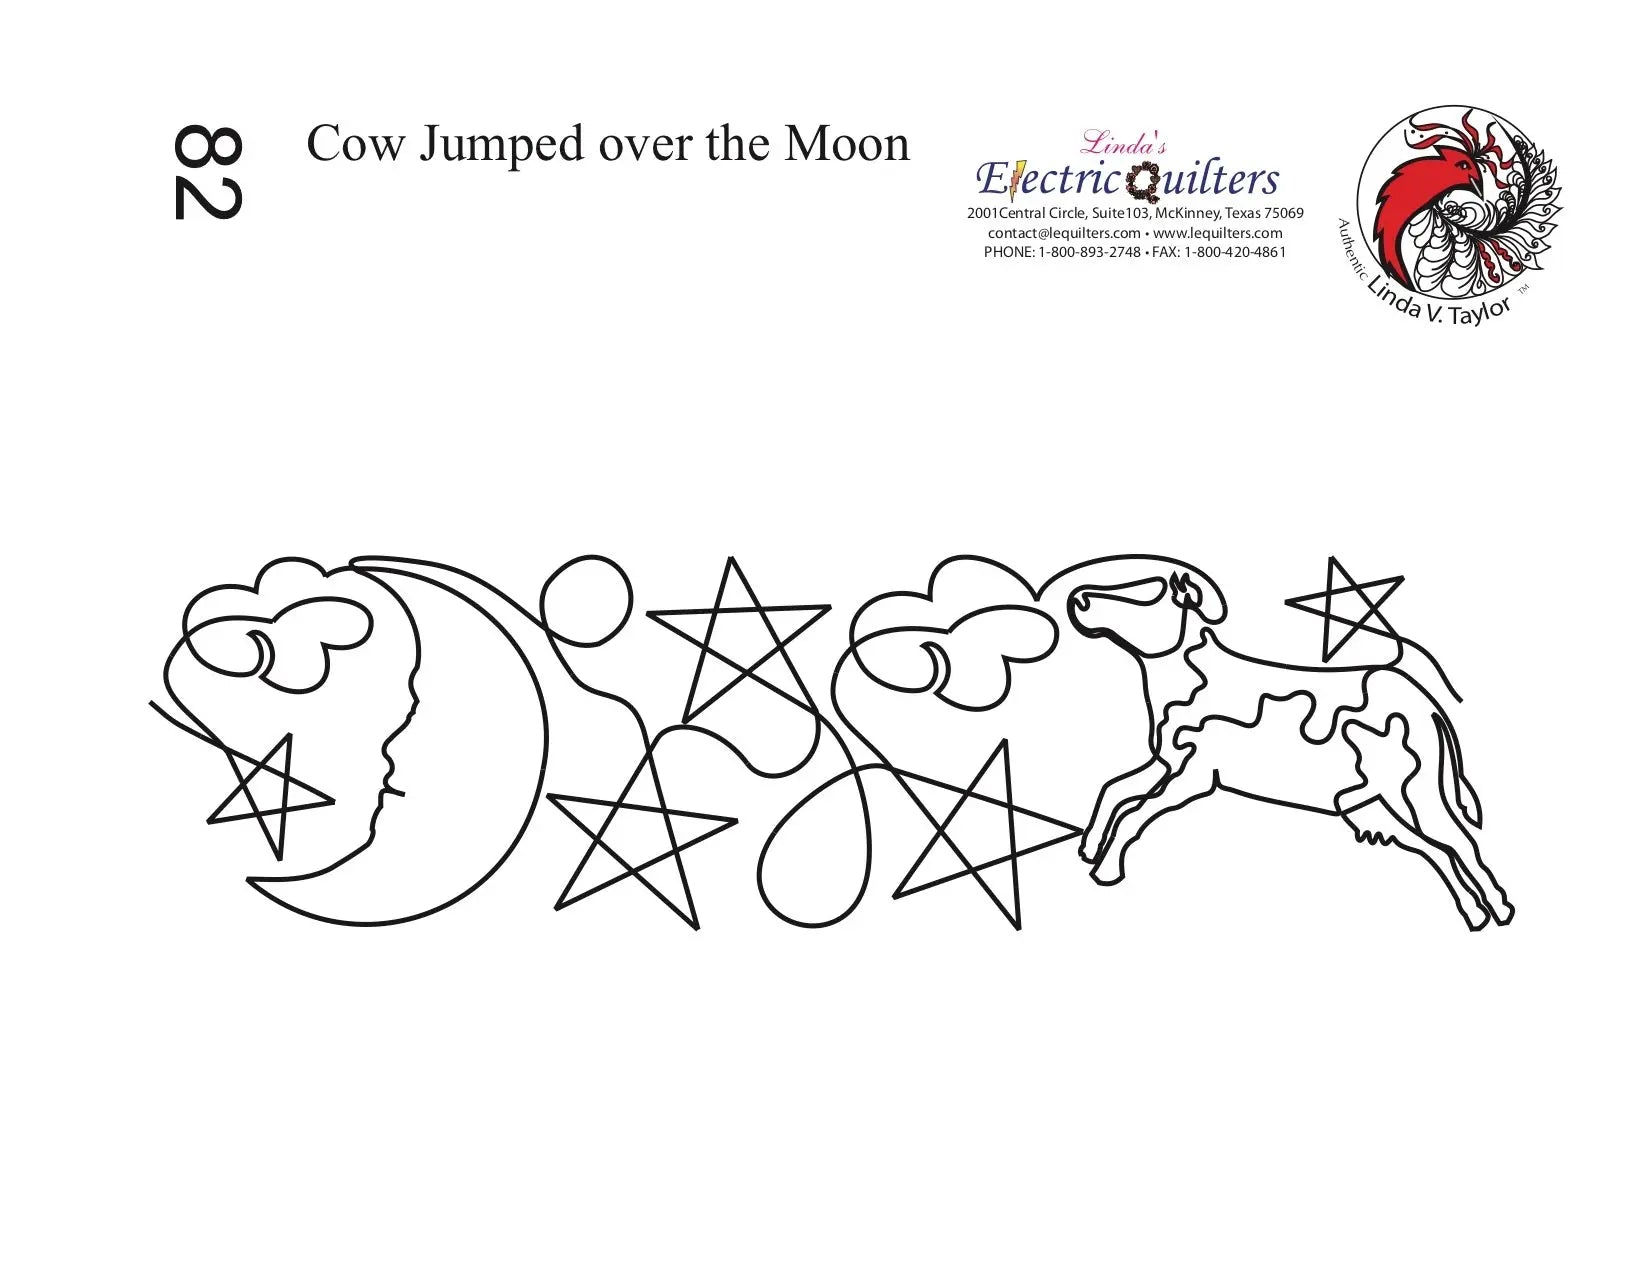 082 Cow Jumped Over The Moon Pantograph by Linda V. Taylor - Linda's Electric Quilters